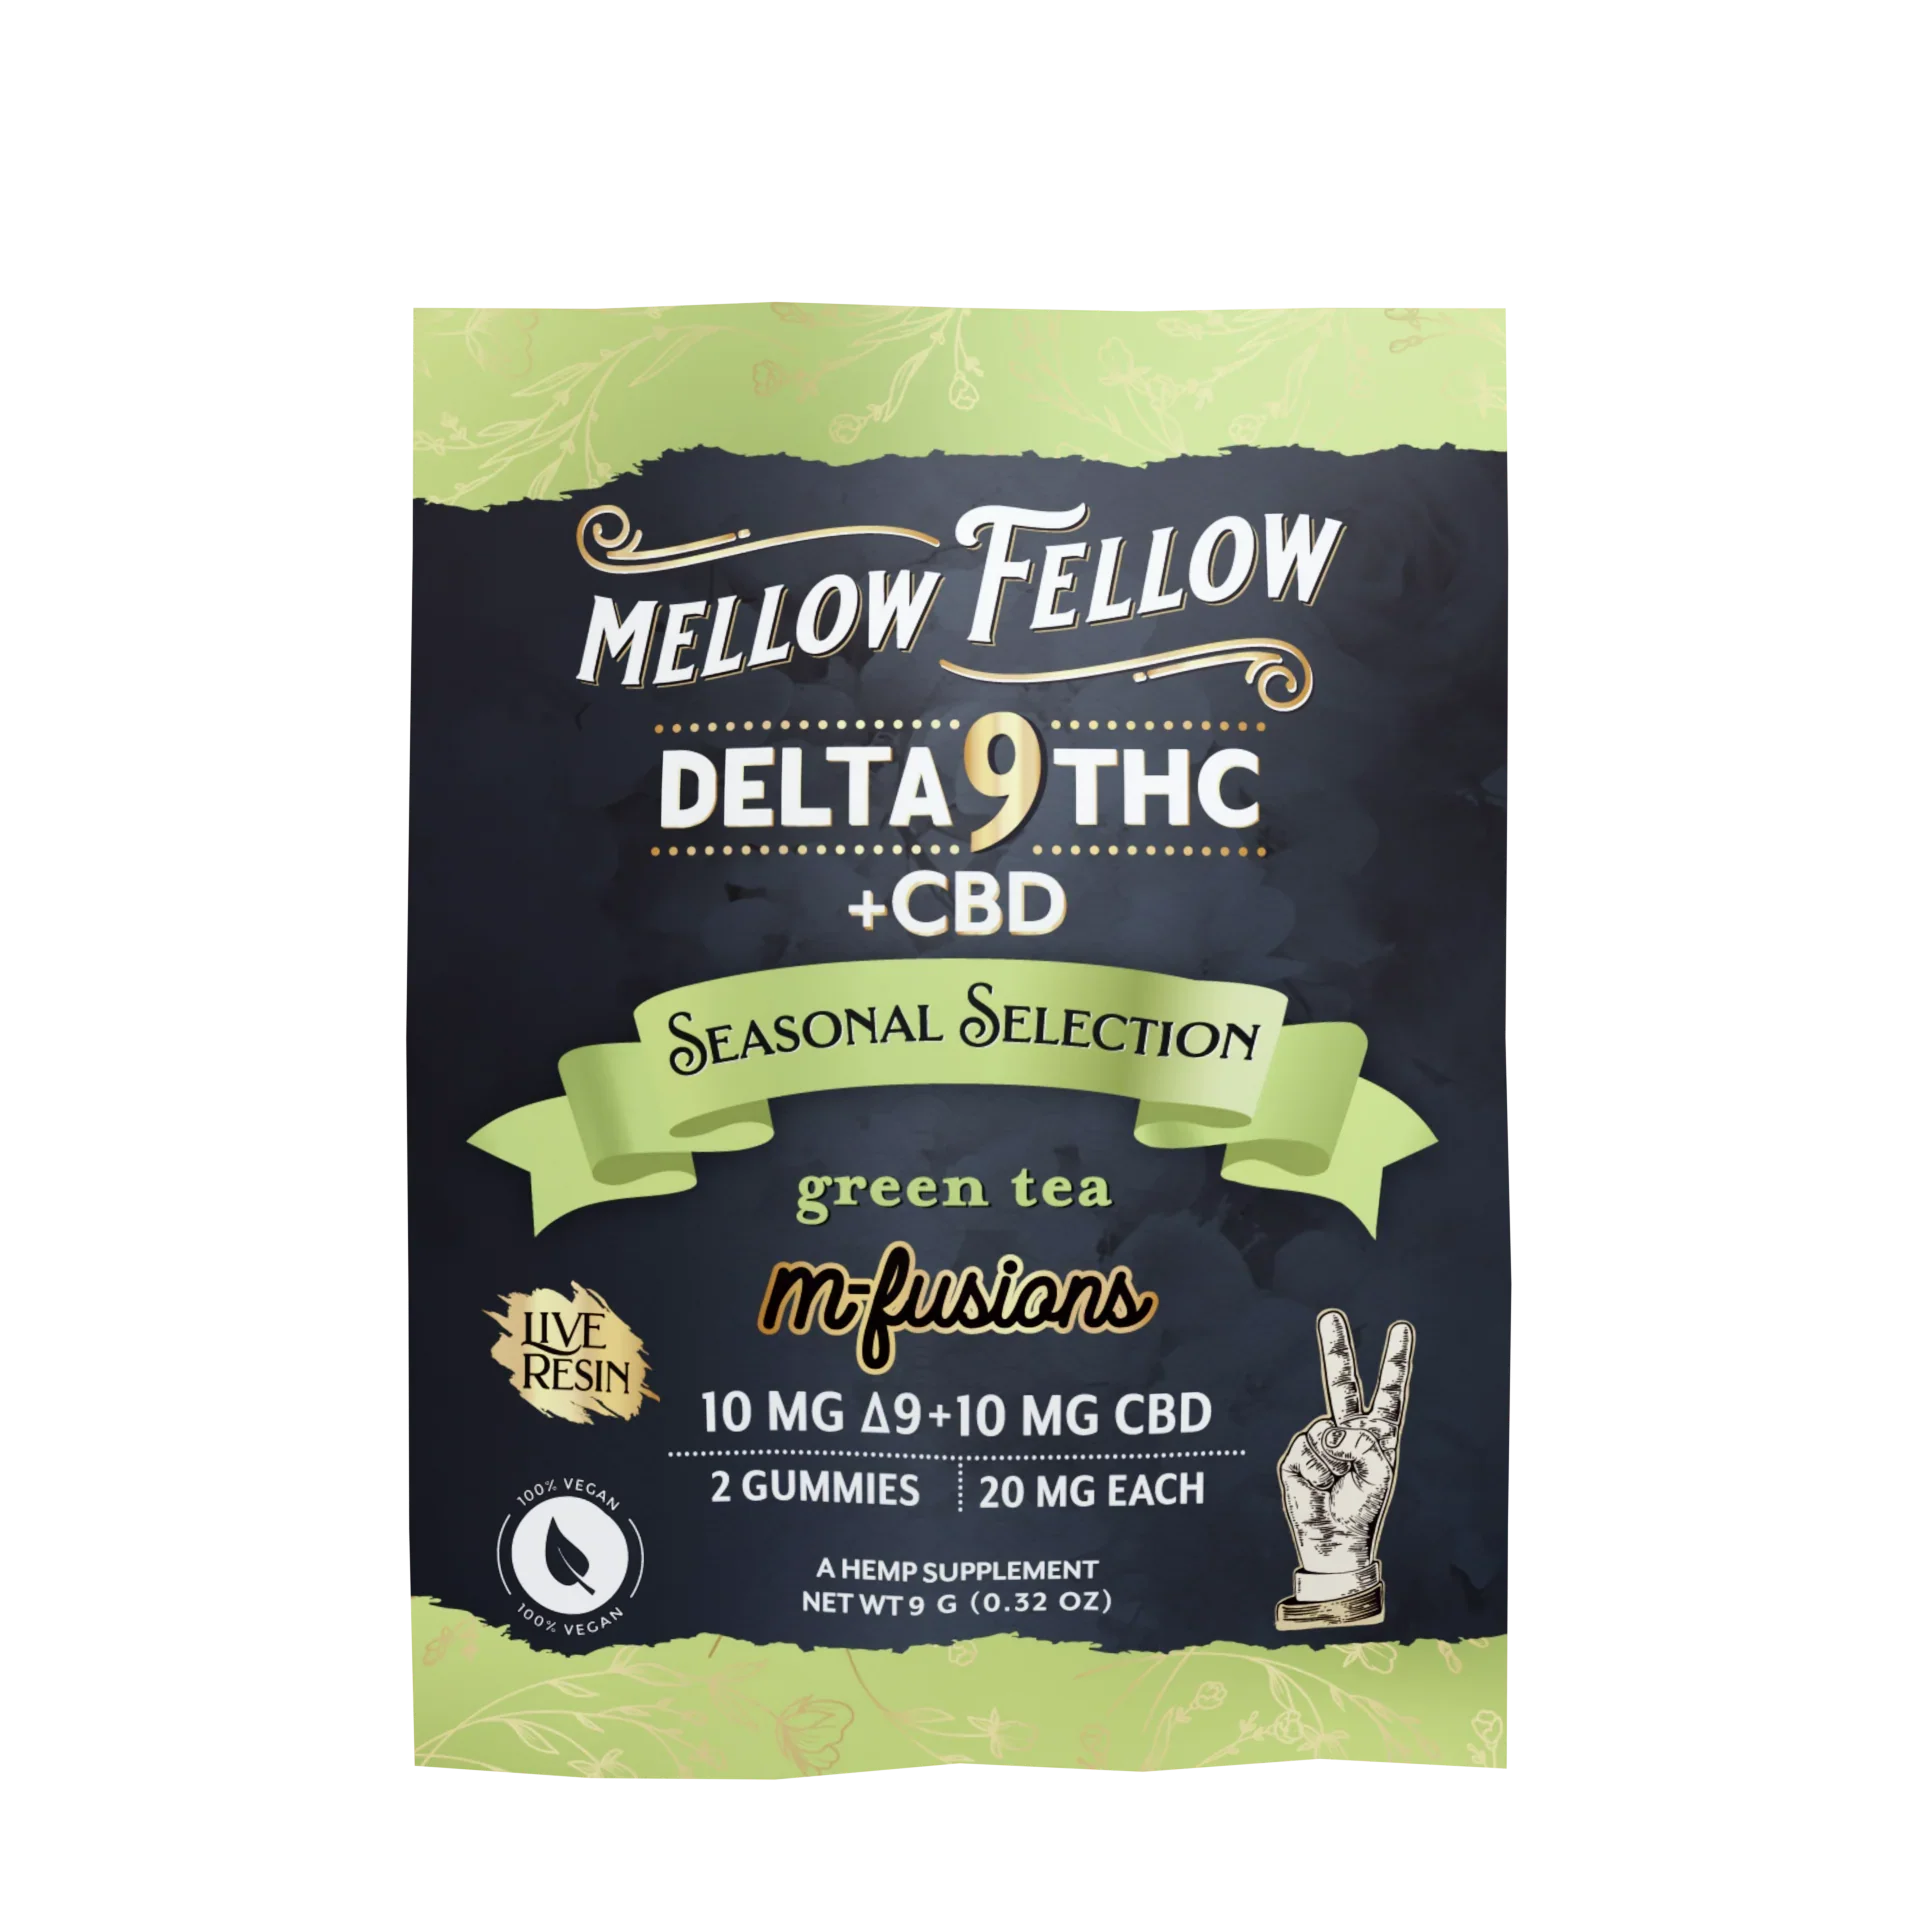 Mellow Fellow Live Resin Infused Edibles - 2cnt 40mg Delta 9 THC & CBD - Green Tea (Seasonal Selection) Best Price